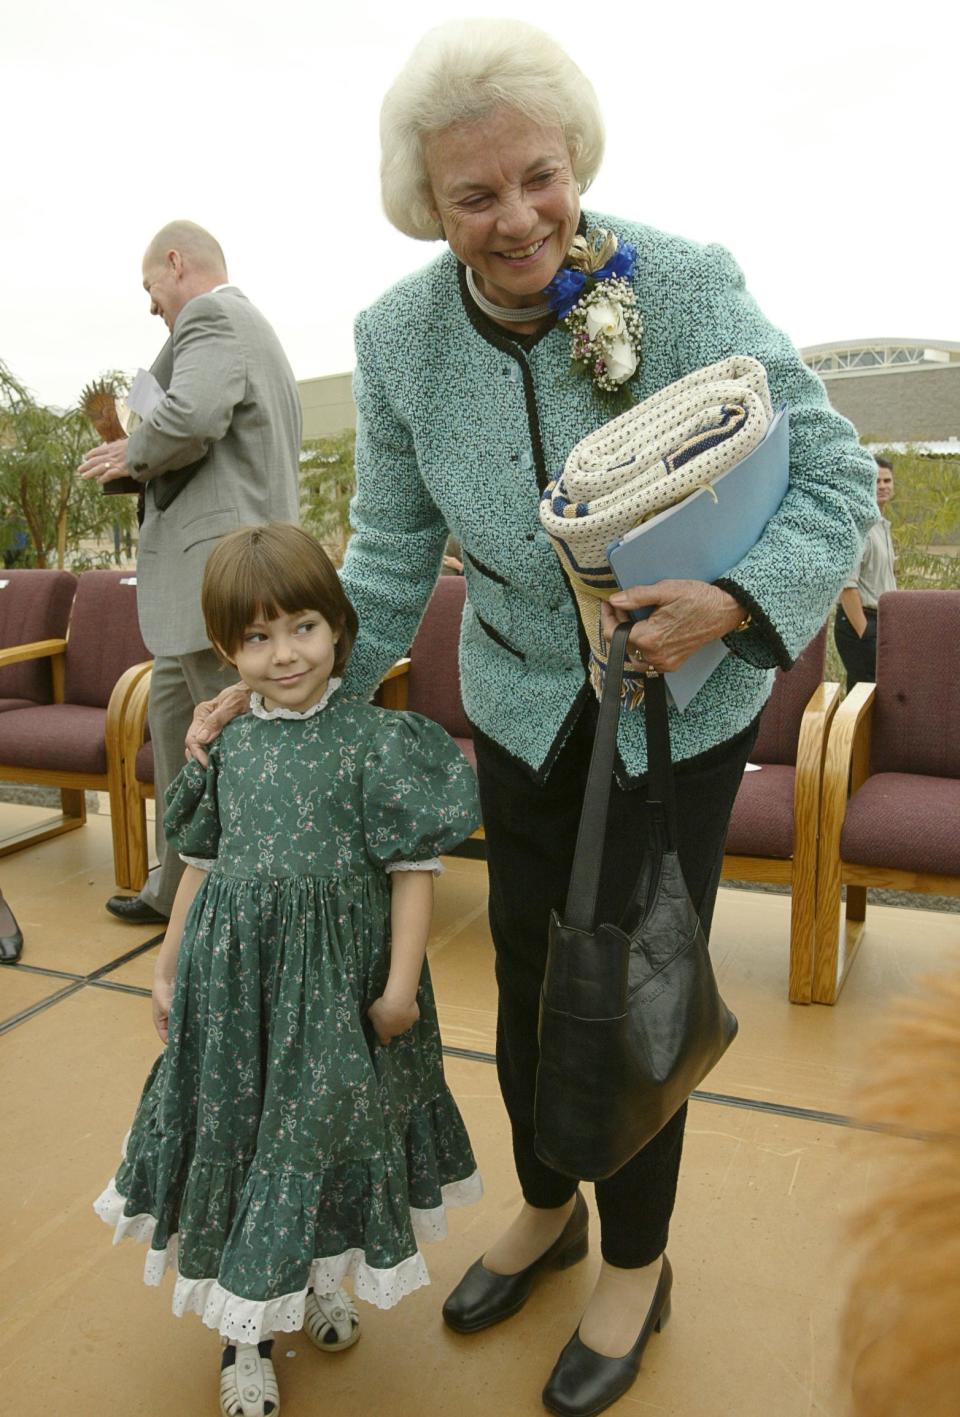 The dedication of the new Sandra Day O'Connor High School in north Phoenix in 2005. Pictured is Sandra Day O'Connor and Kimberly Lange.